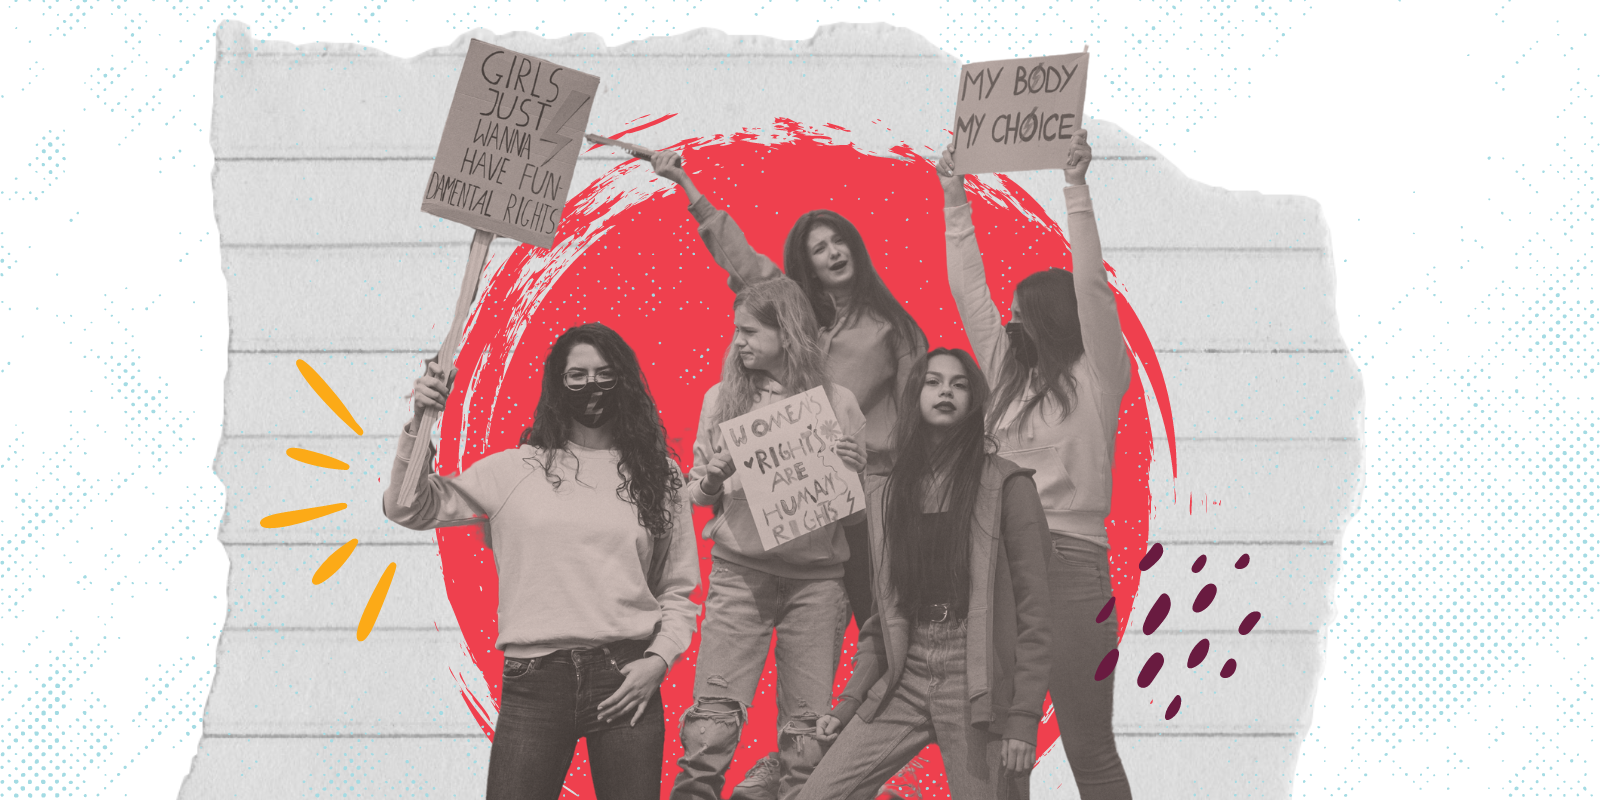 Collage of four young women holding protest signs about reproductive freedom